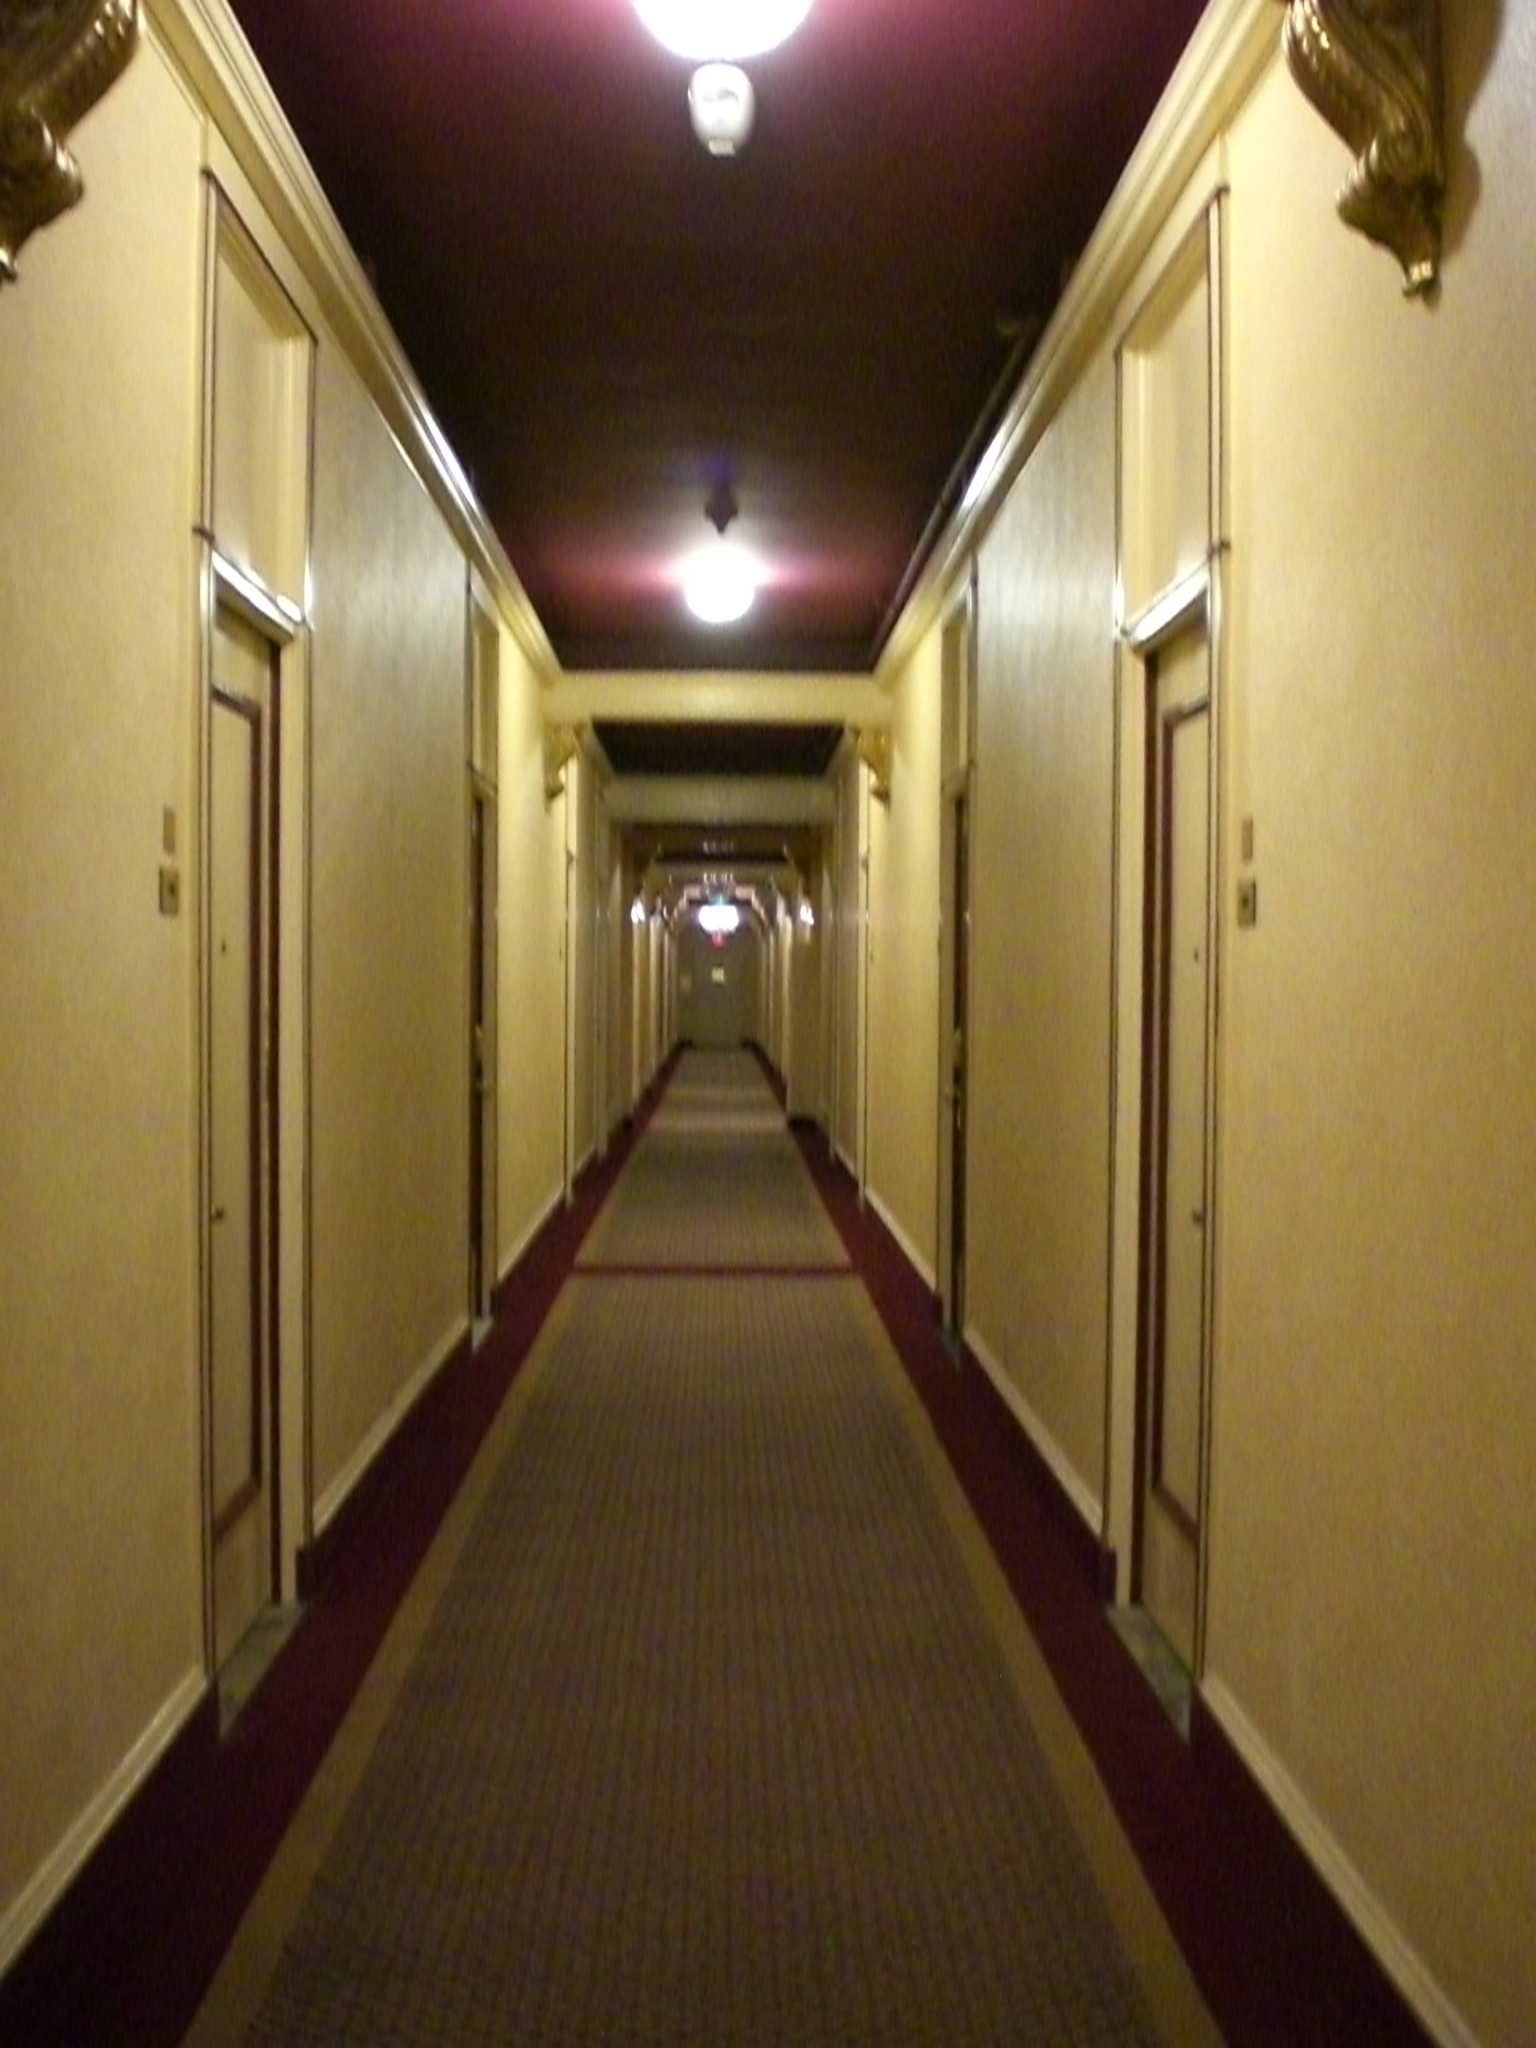 this is an hallway with light shining on it